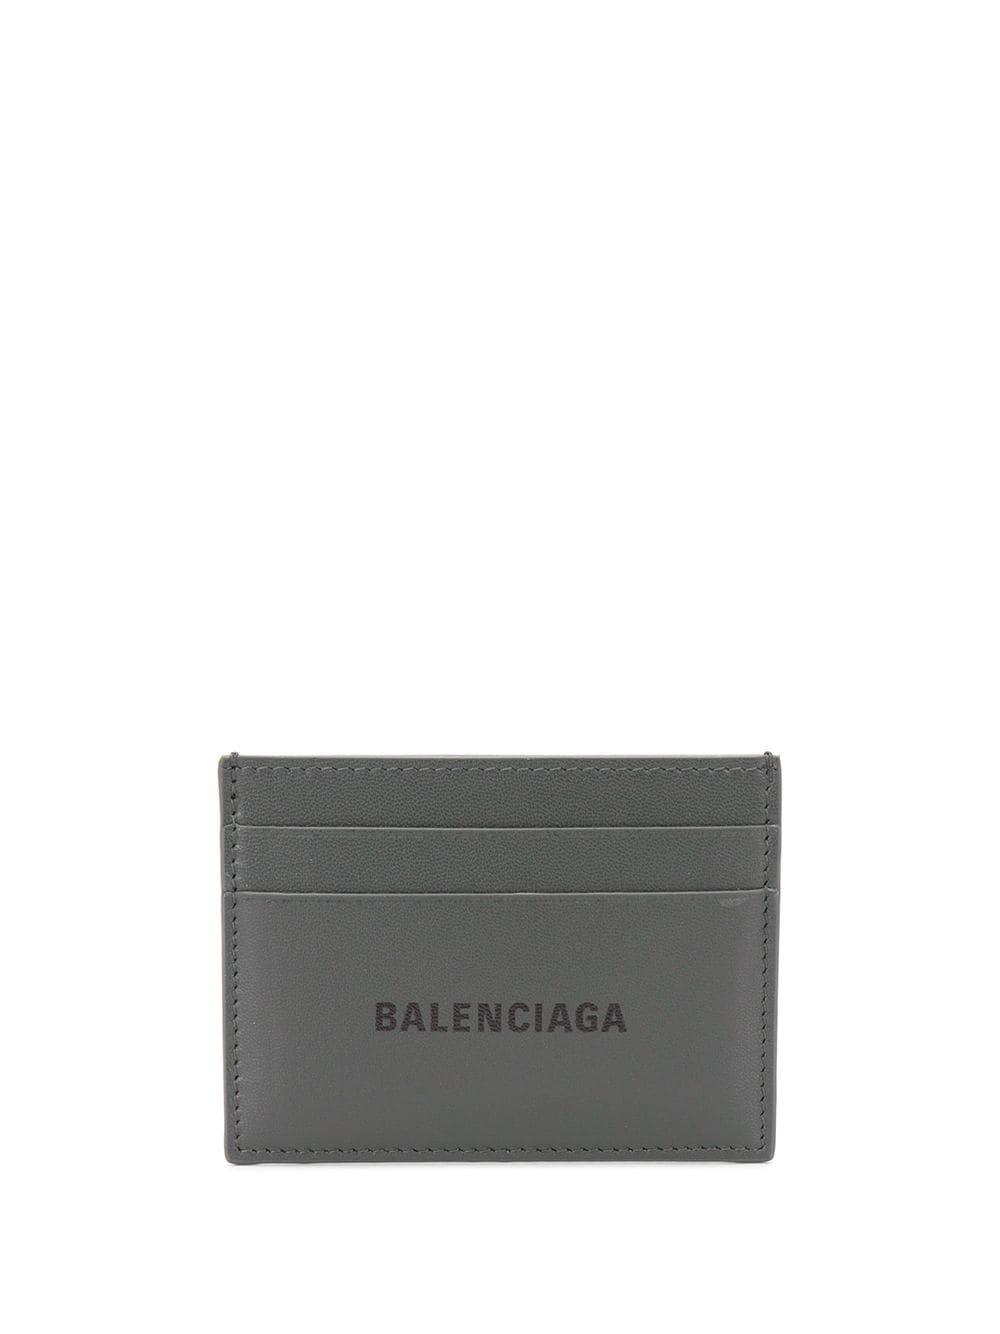 Balenciaga Leather Everyday Multi Card Holder in Anthracite / Black (Gray)  for Men - Lyst